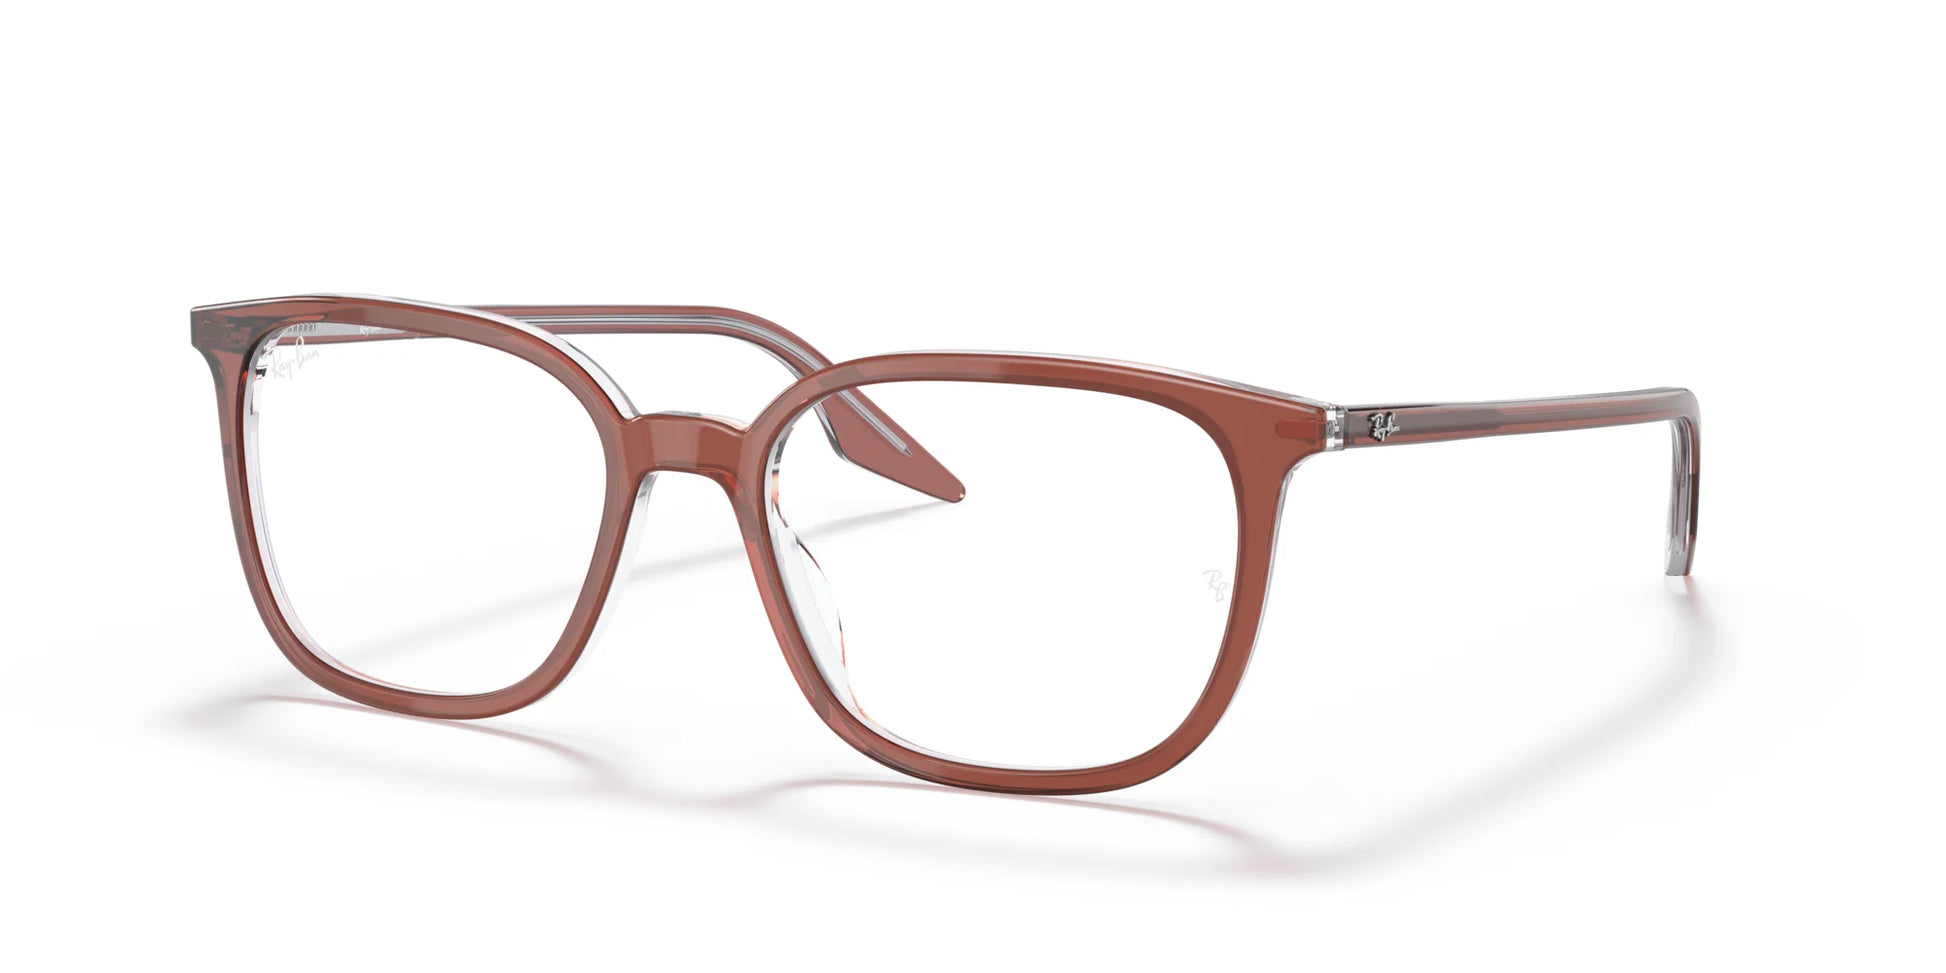 Ray-Ban RX5406 Eyeglasses Brown On Transparent / Clear